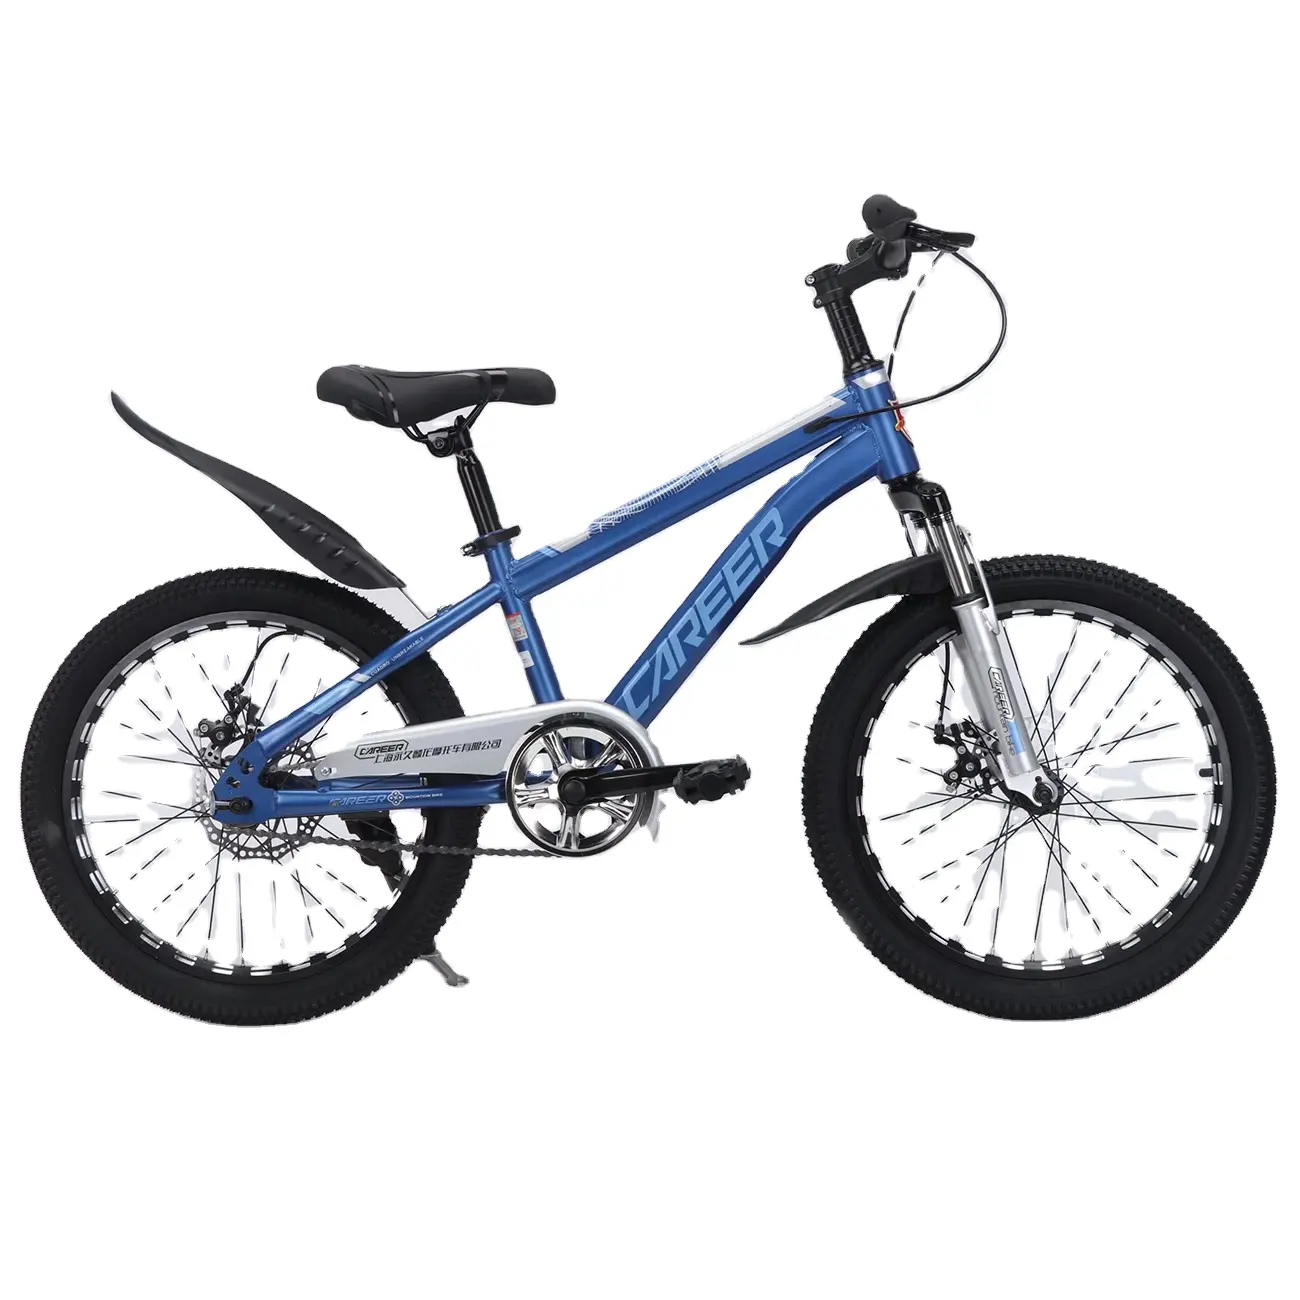 Mountain bike adult children boys and girls primary and secondary school students racing 2022 24 inch shock-absorbing bicycle